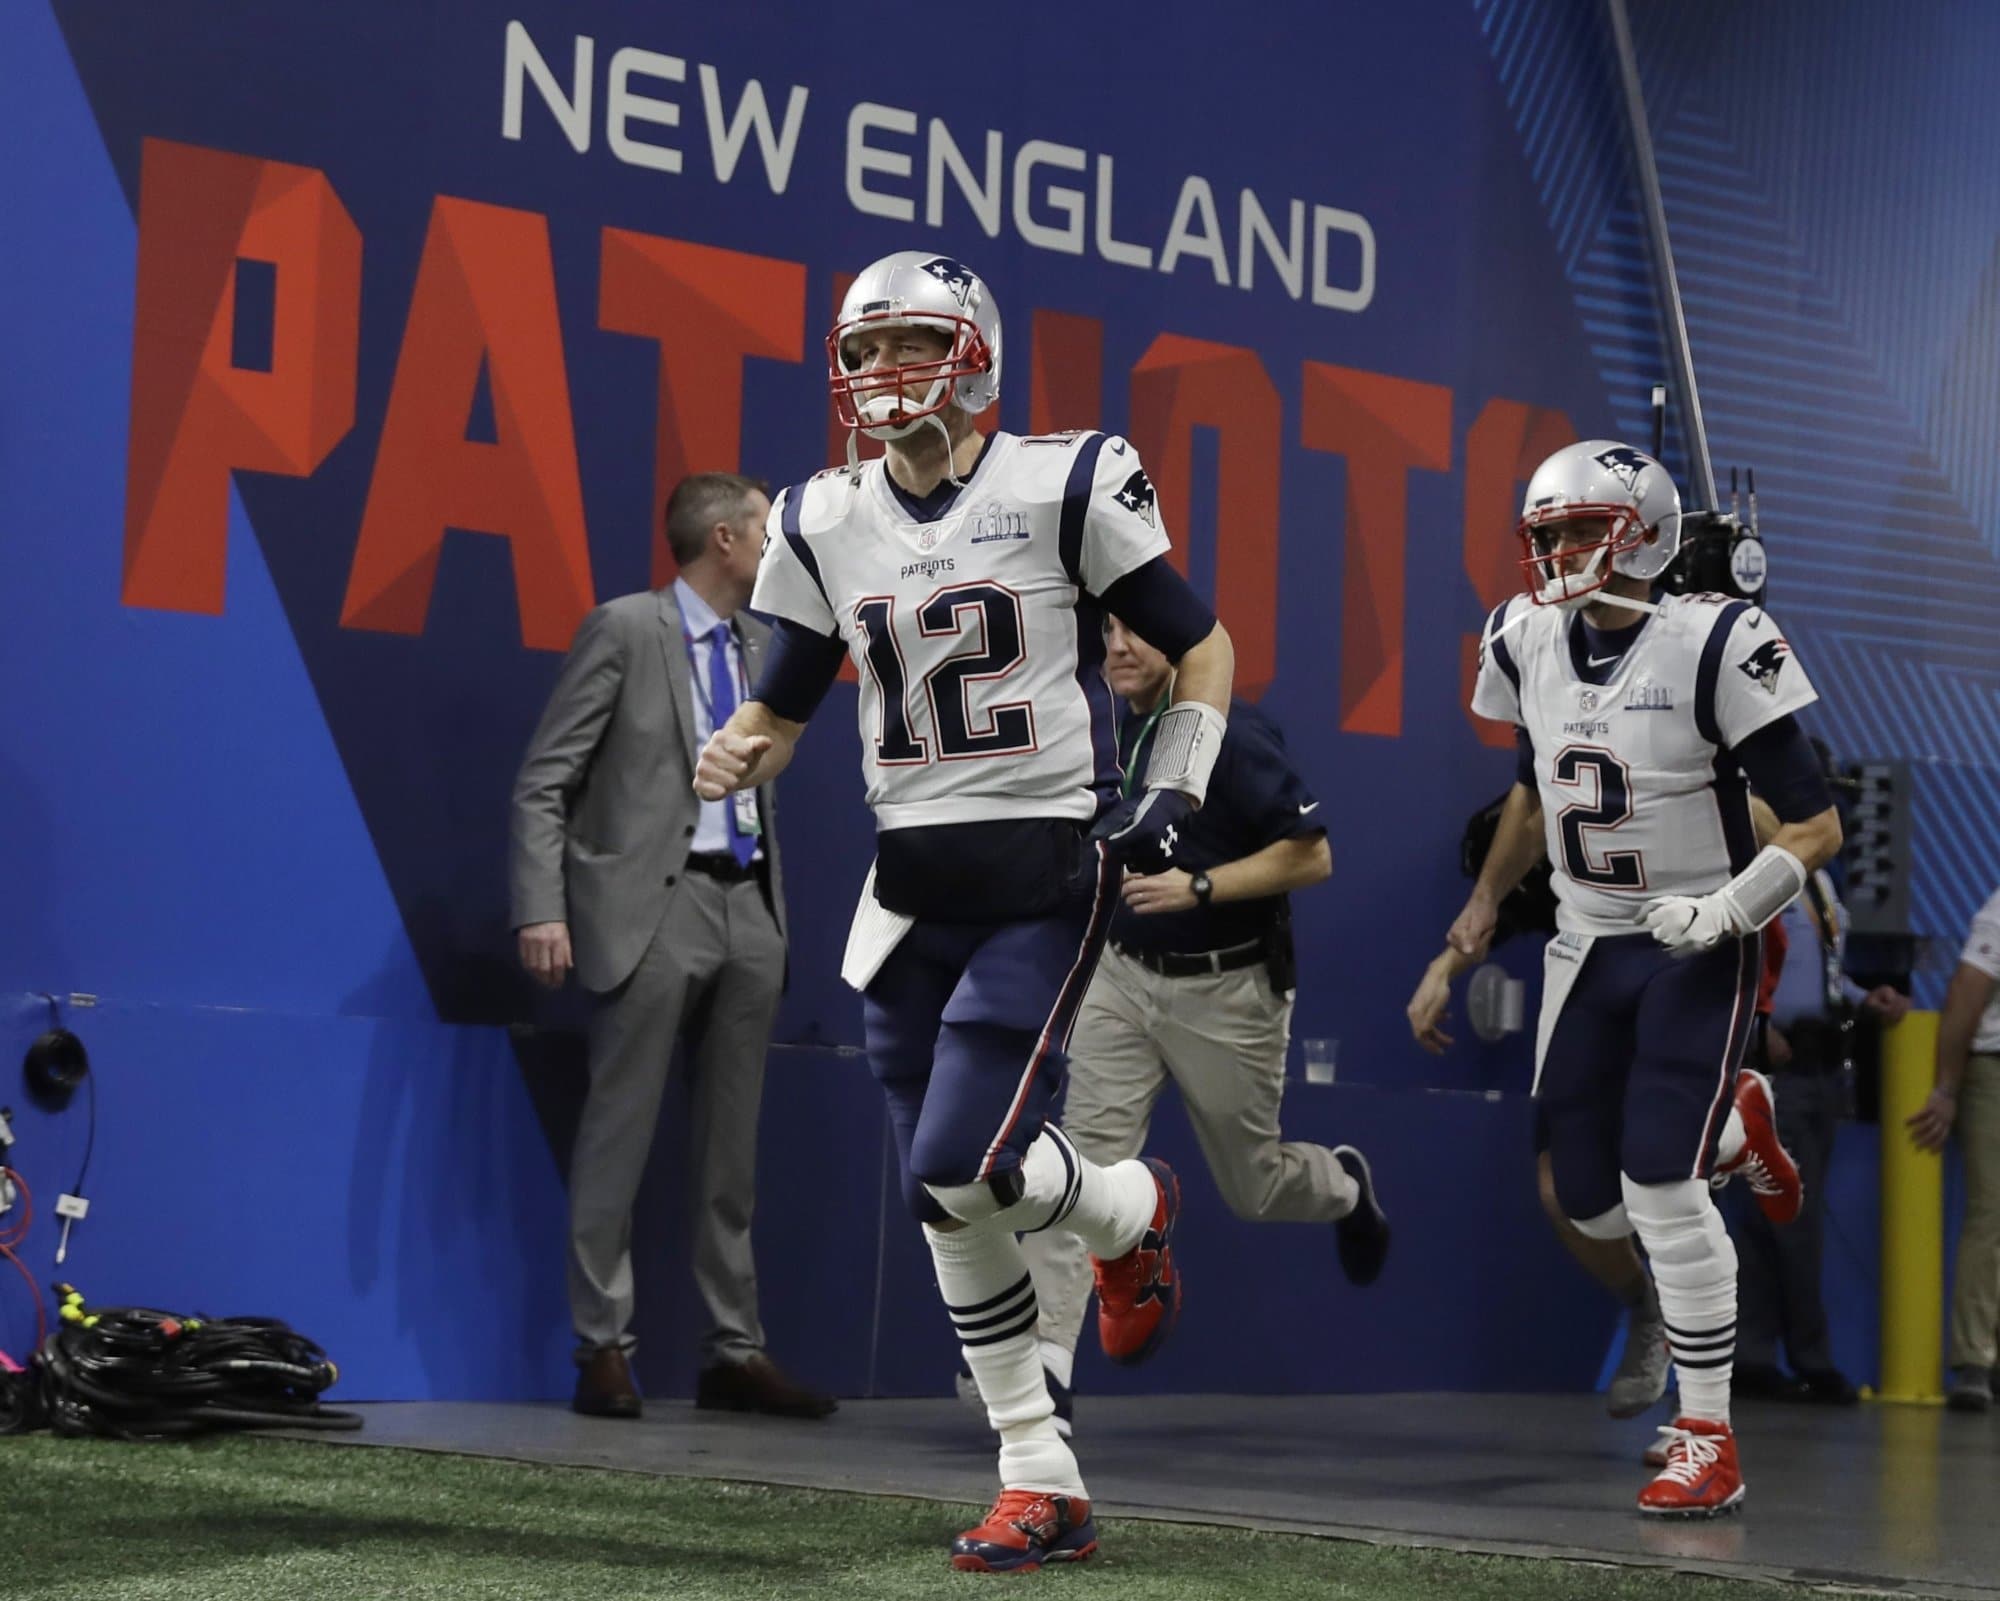 New England Patriots' Tom Brady (12) and Brian Hoyer (2) enter the field, before the NFL Super Bowl 53 football game between the Los Angeles Rams and the New England Patriots Sunday, Feb. 3, 2019, in Atlanta. (AP Photo/Matt Rourke)